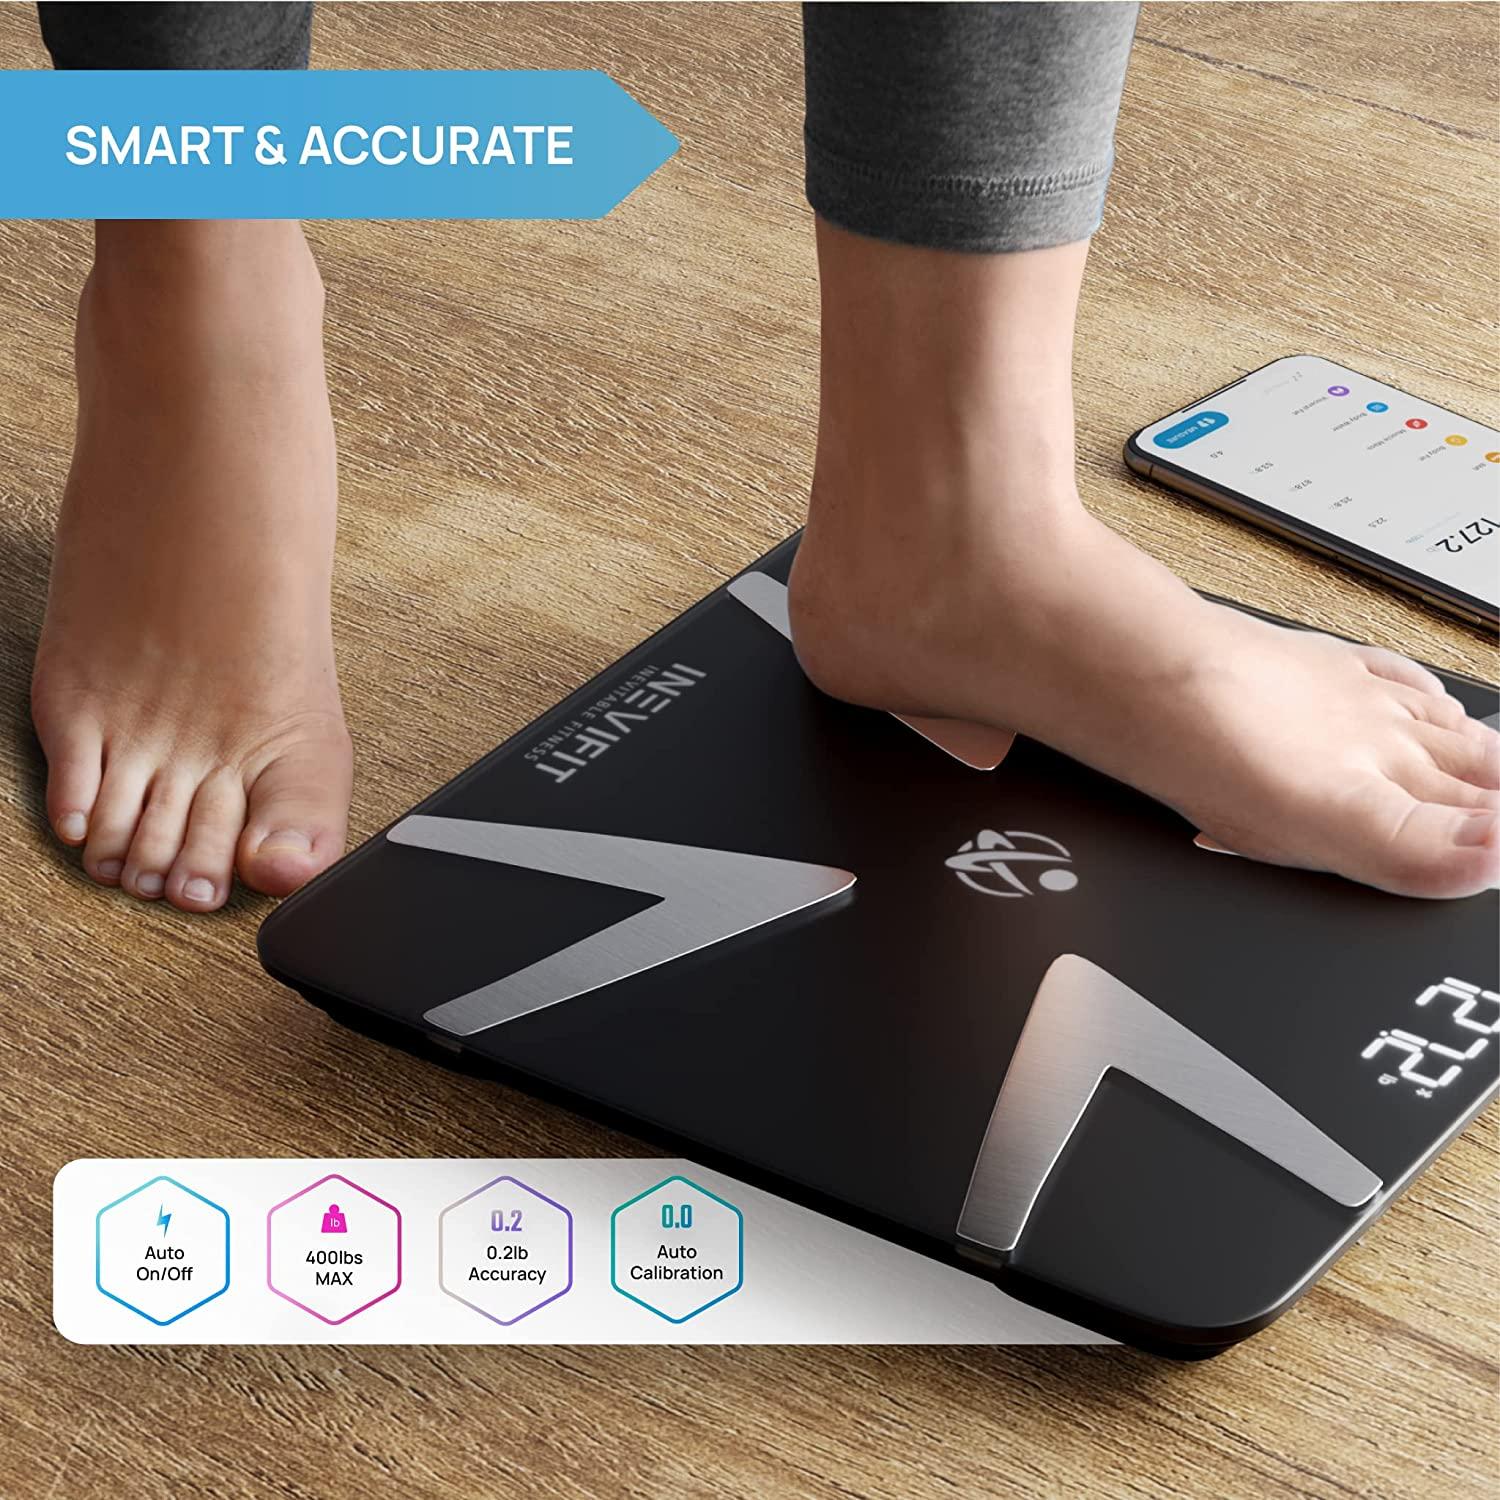 INEVIFIT Body Fat Scale, Highly Accurate Digital Bathroom Body Composition  Analyzer, Measures Weight, Body Fat, Water, Muscle, BMI, Visceral Levels 